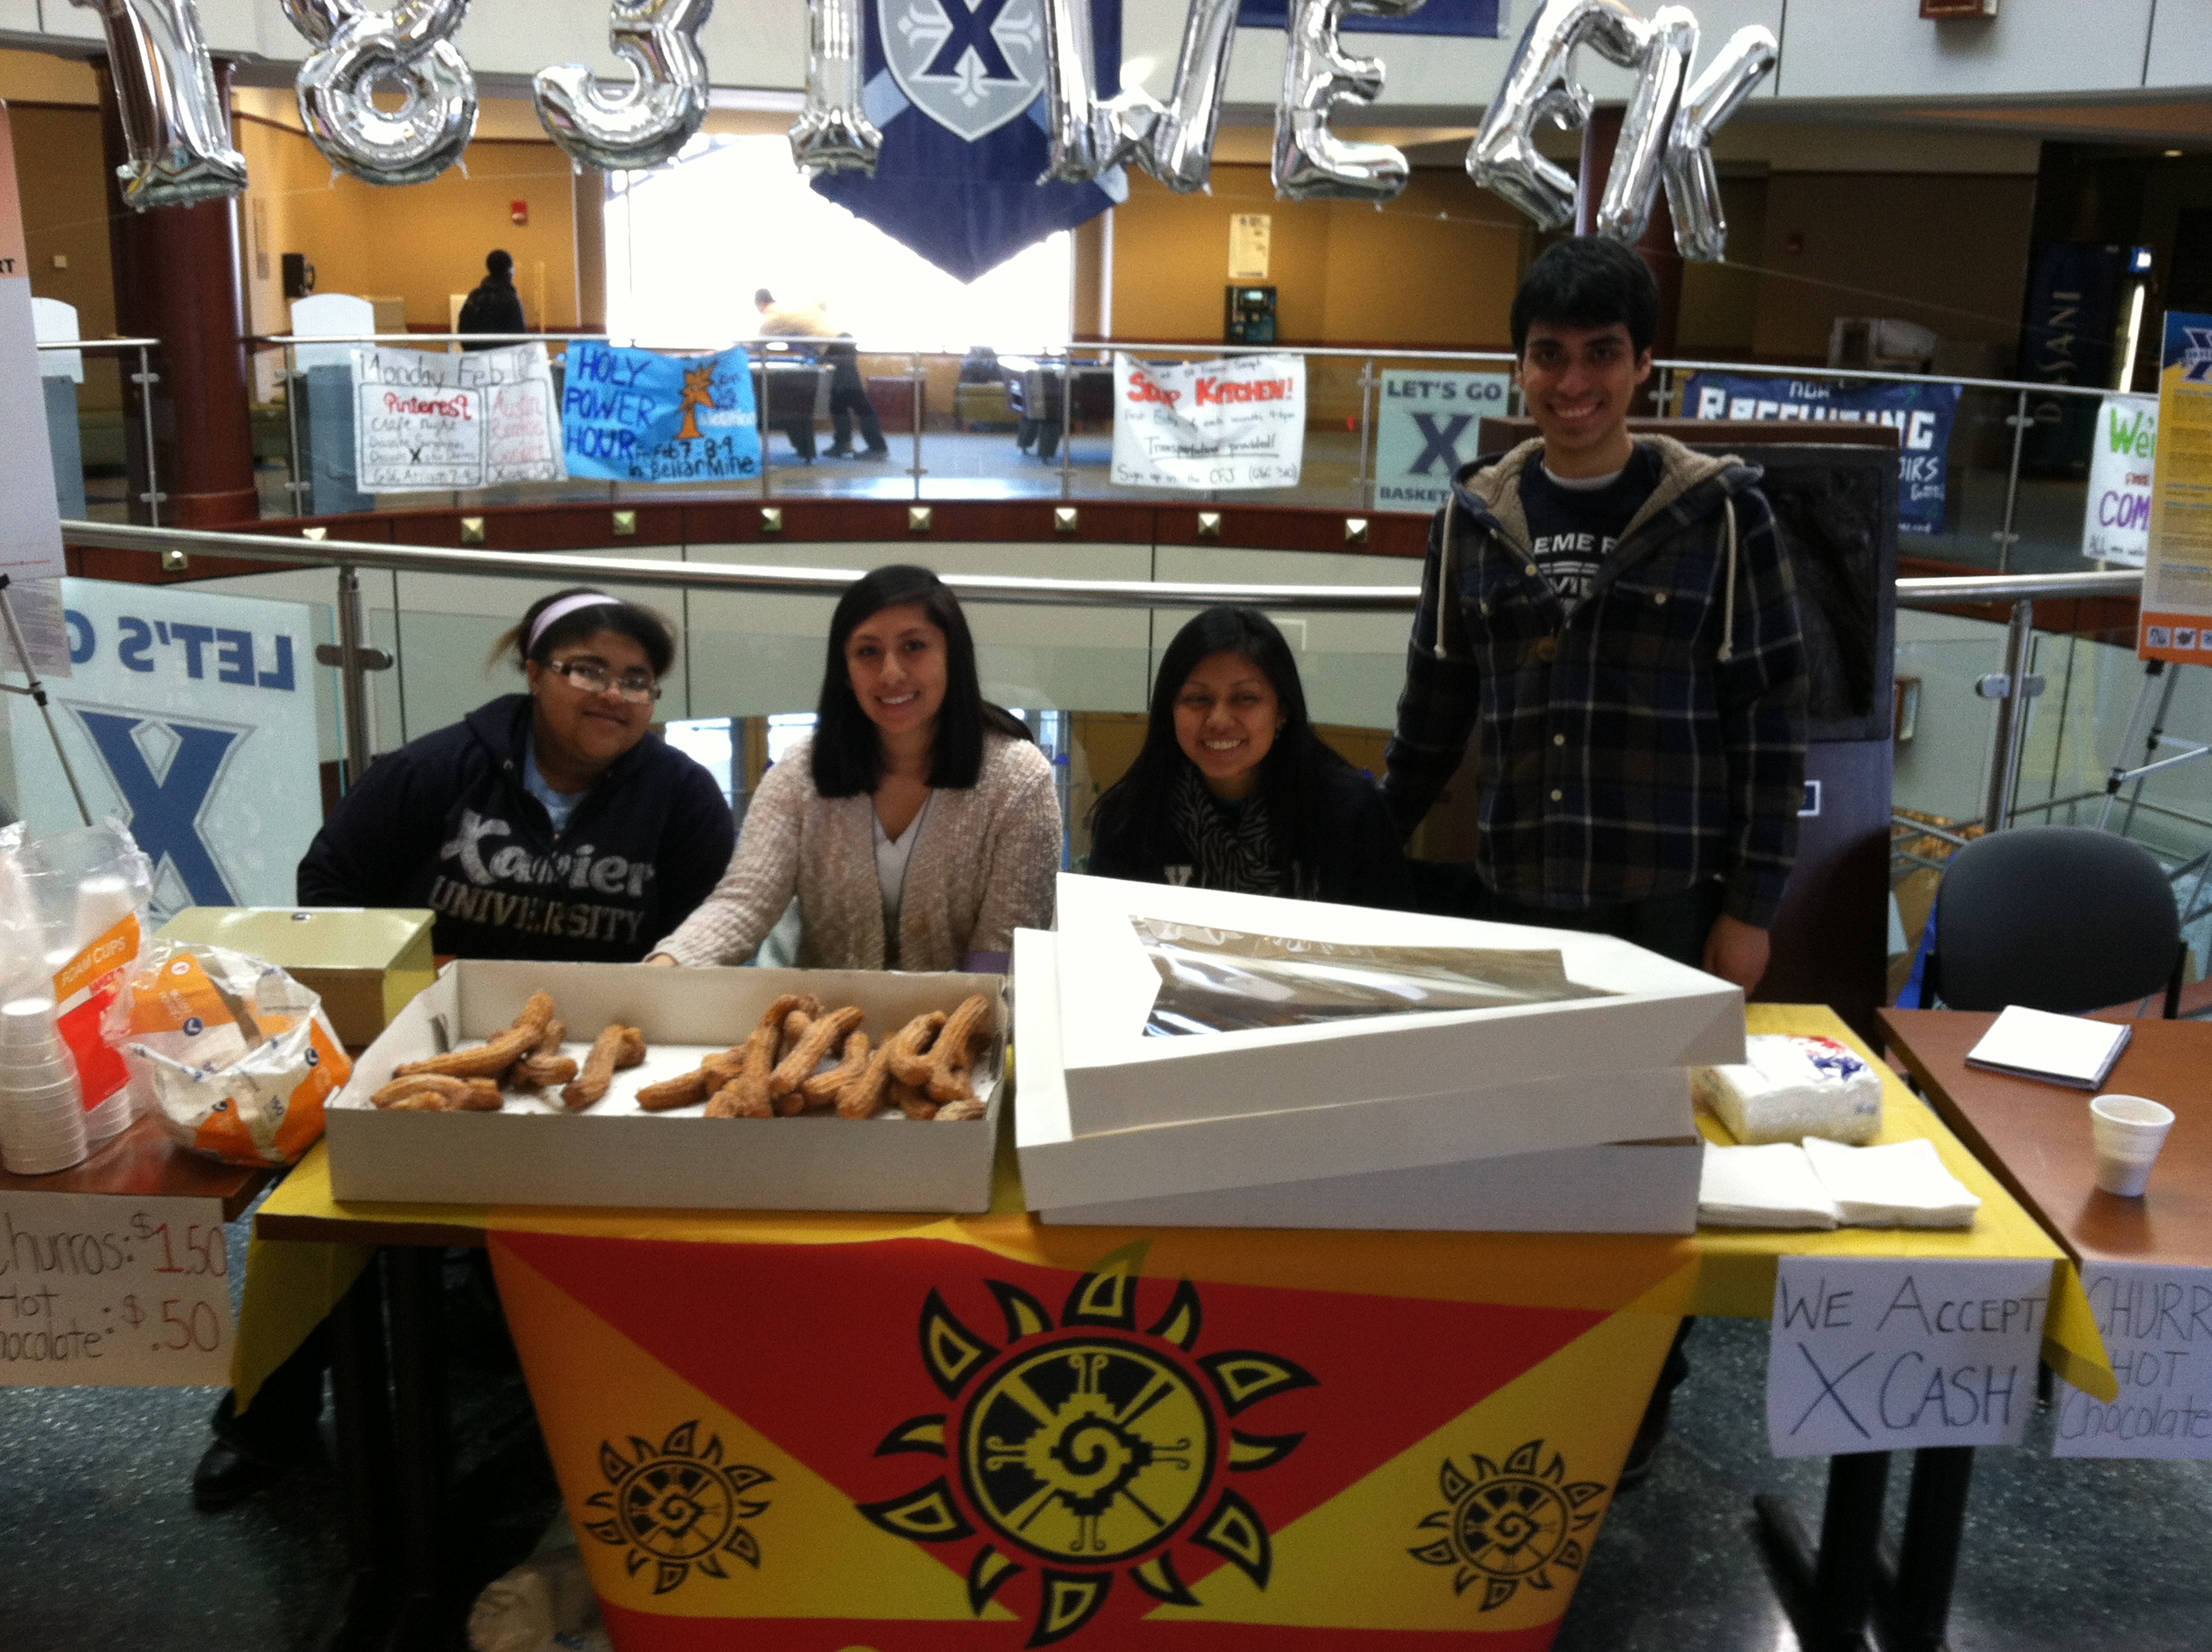 SOL raises funds with event “Churros and Hot Chocolate”